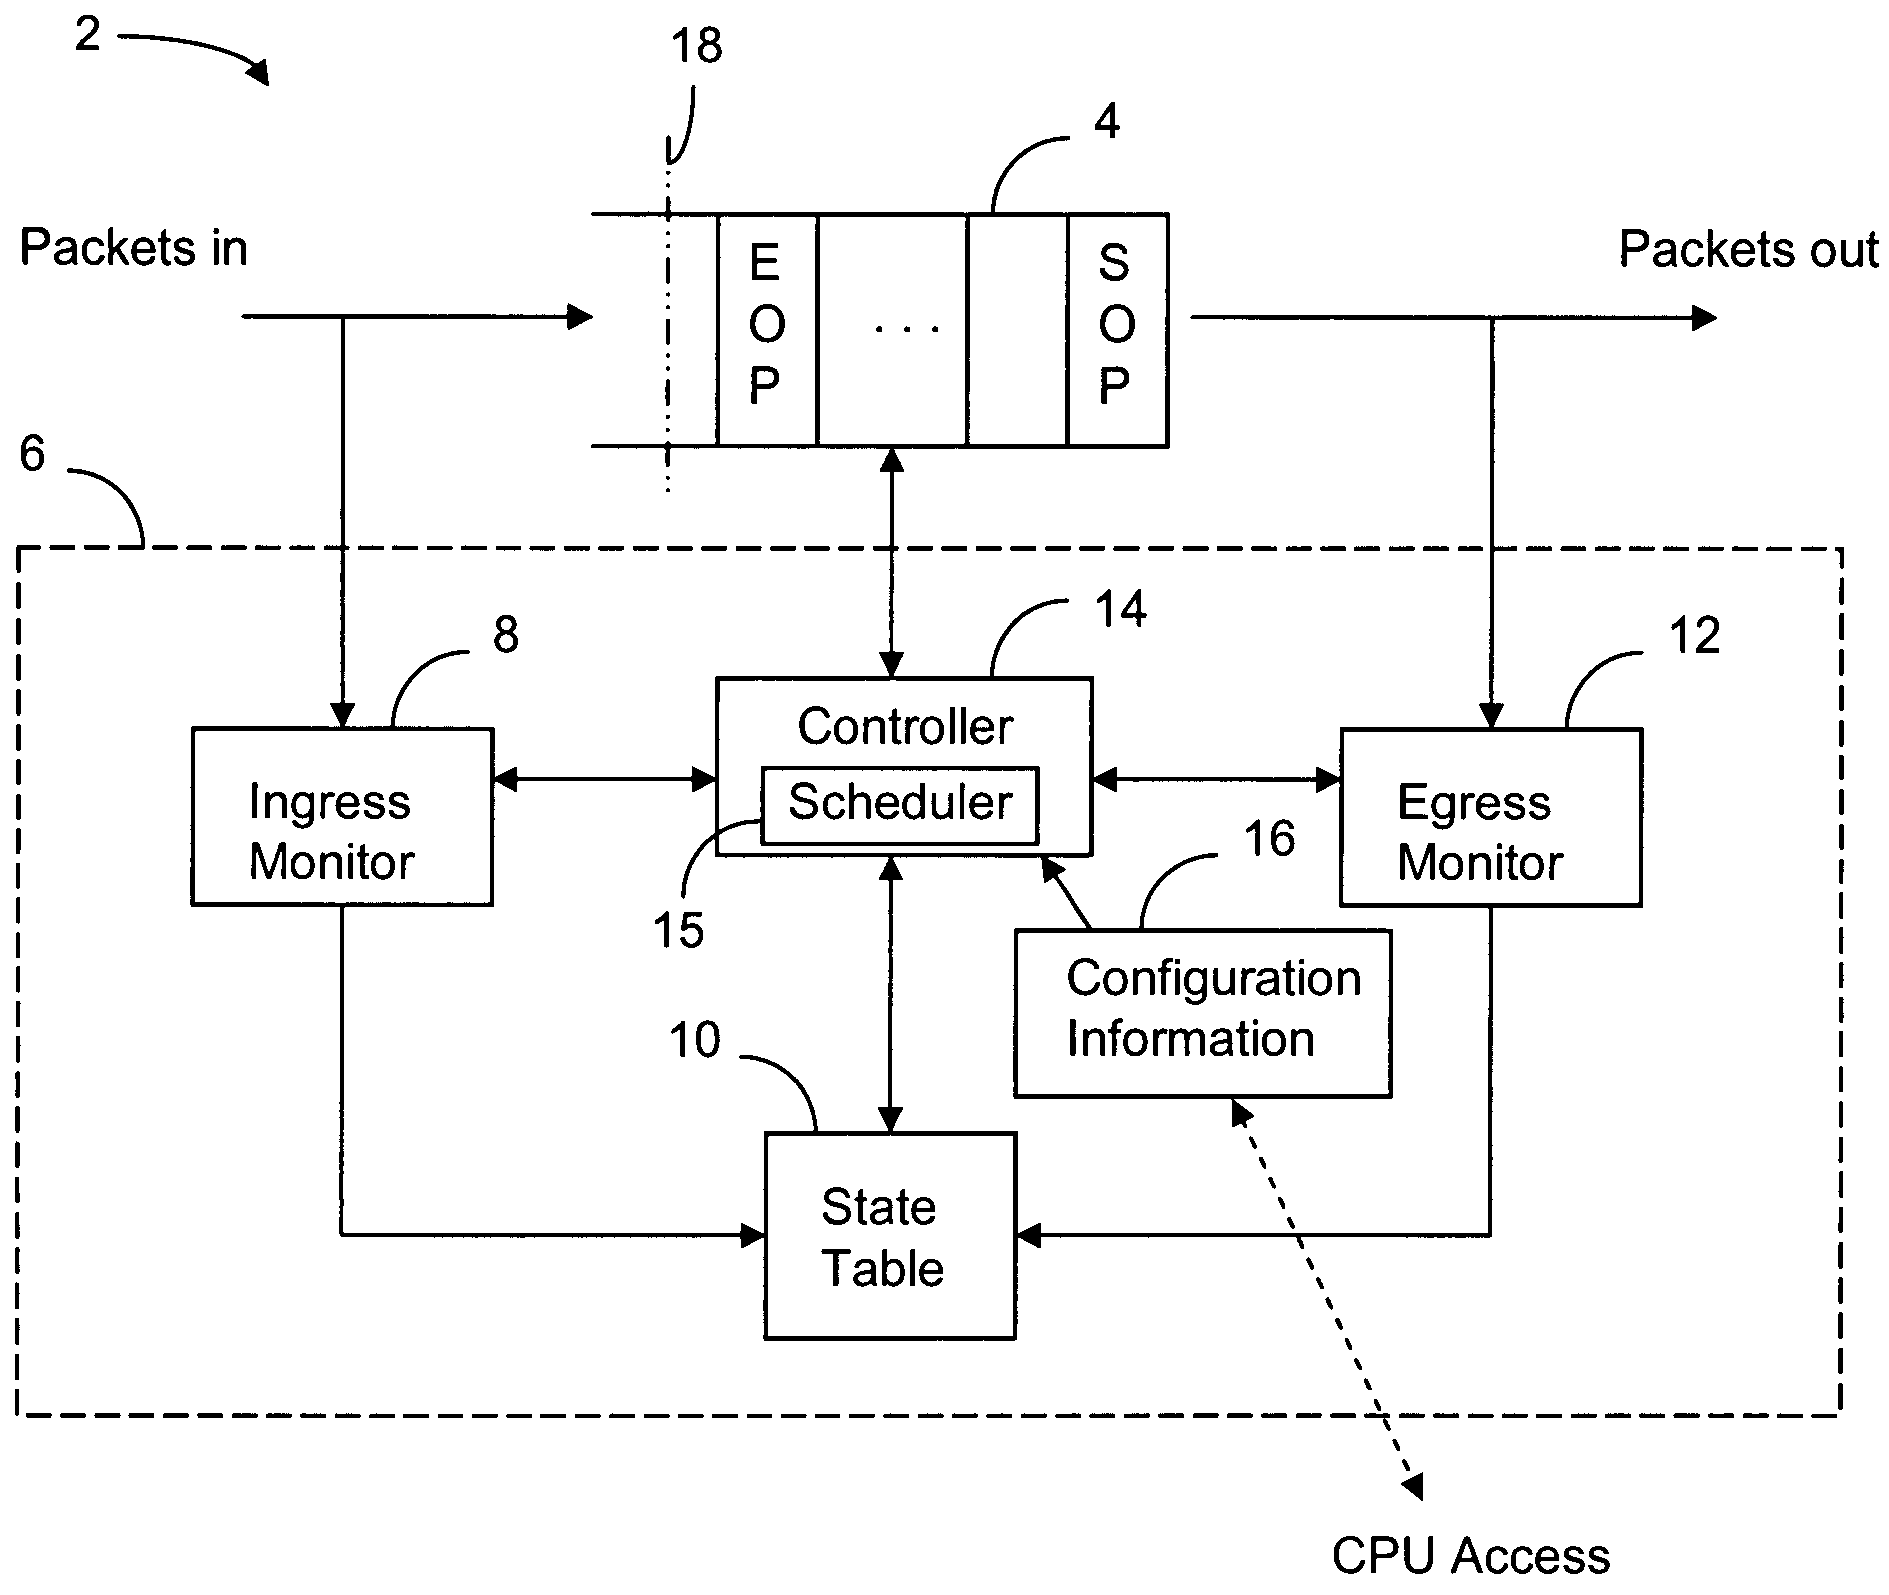 Input/output buffer controller for optimized memory utilization and prevention of packet under-run errors